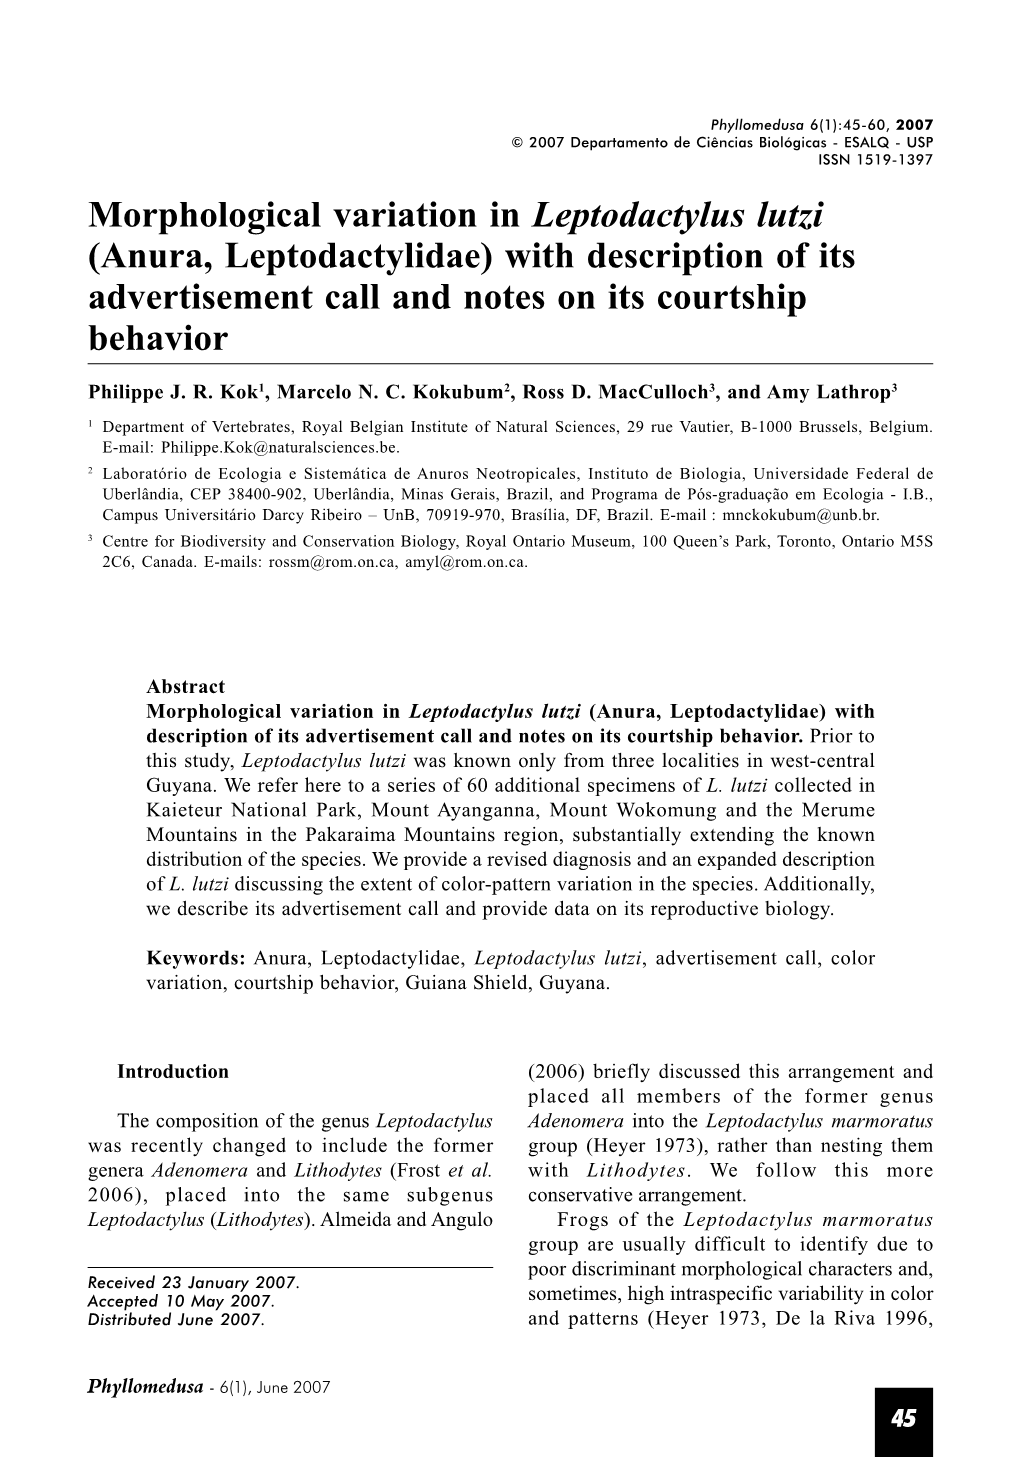 Morphological Variation in Leptodactylus Lutzi (Anura, Leptodactylidae) with Description of Its Advertisement Call and Notes on Its Courtship Behavior